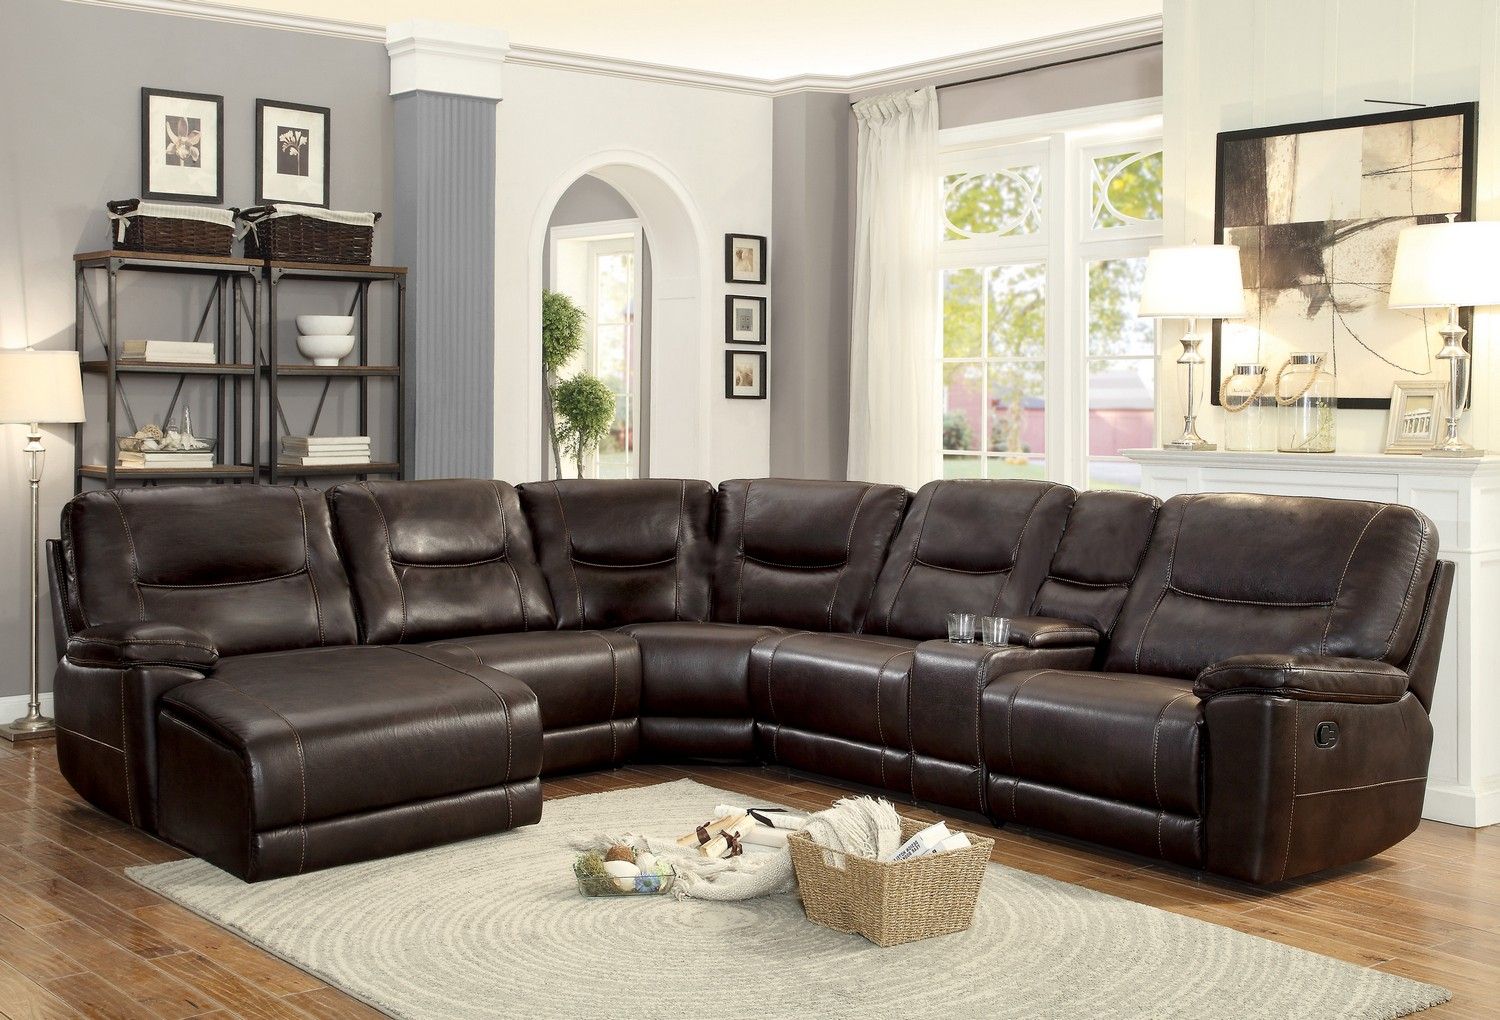 Homelegance Columbus Reclining Sectional Sofa Set B – Breathable Faux In Faux Leather Sectional Sofa Sets (View 7 of 21)